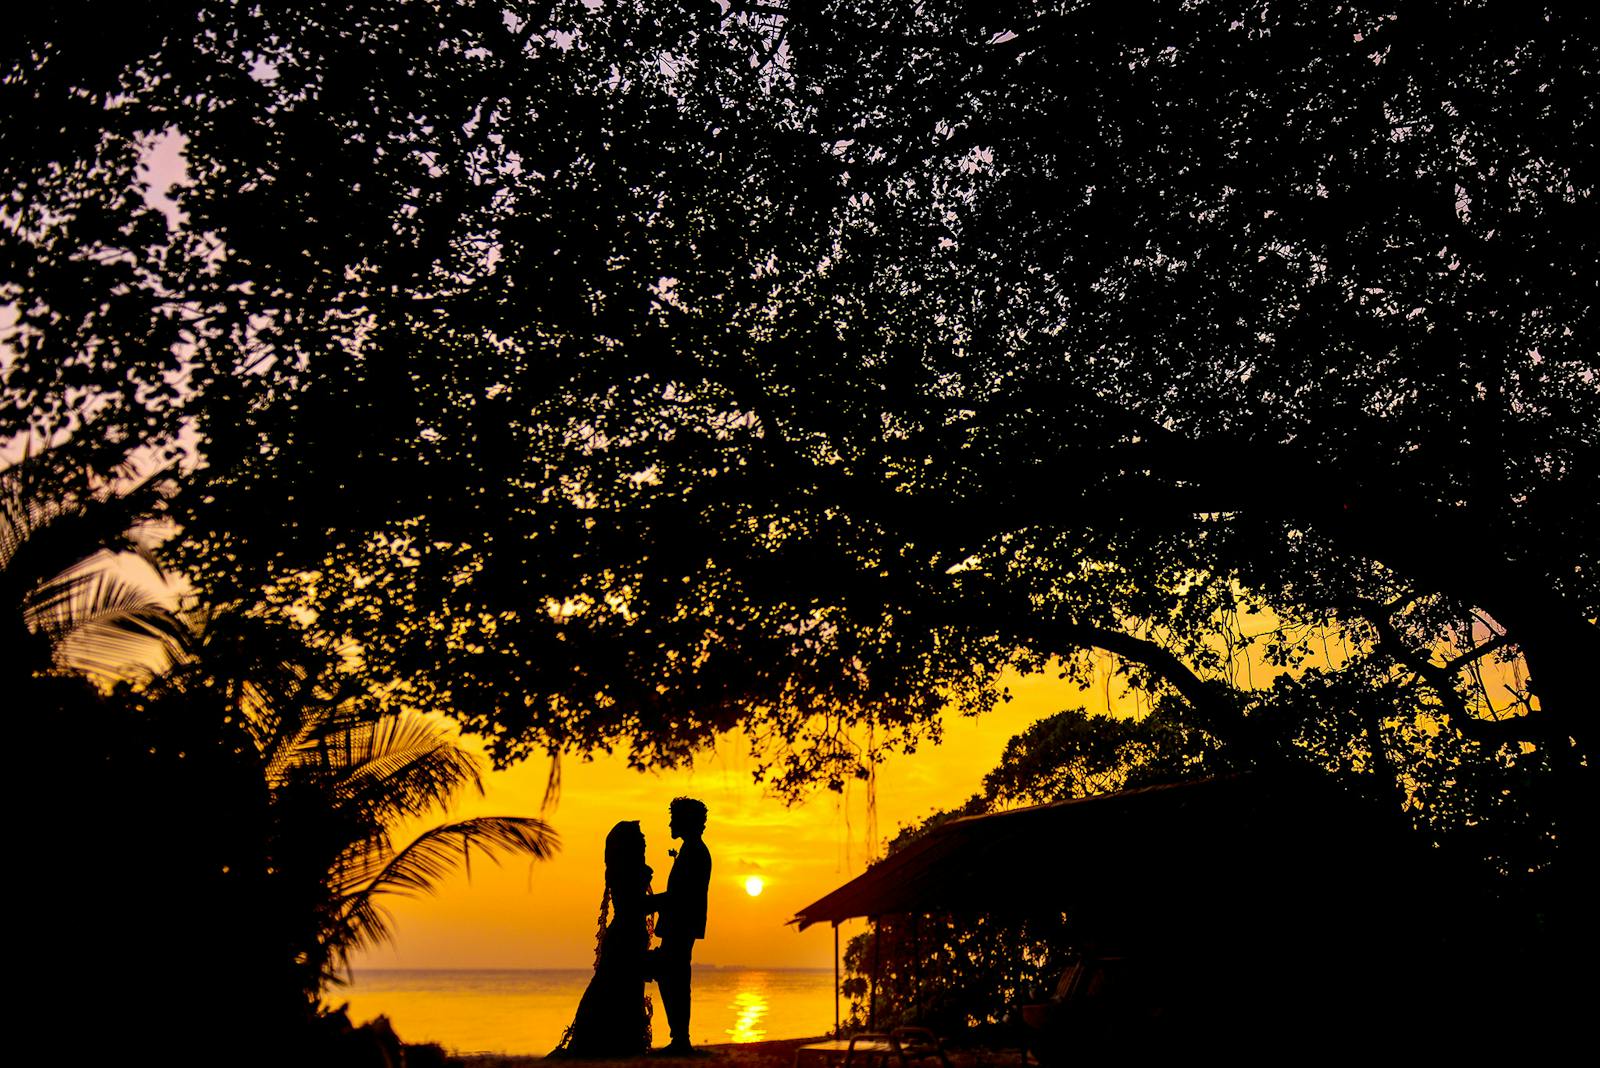 Silhouette Photo of Man and Woman during Sunset